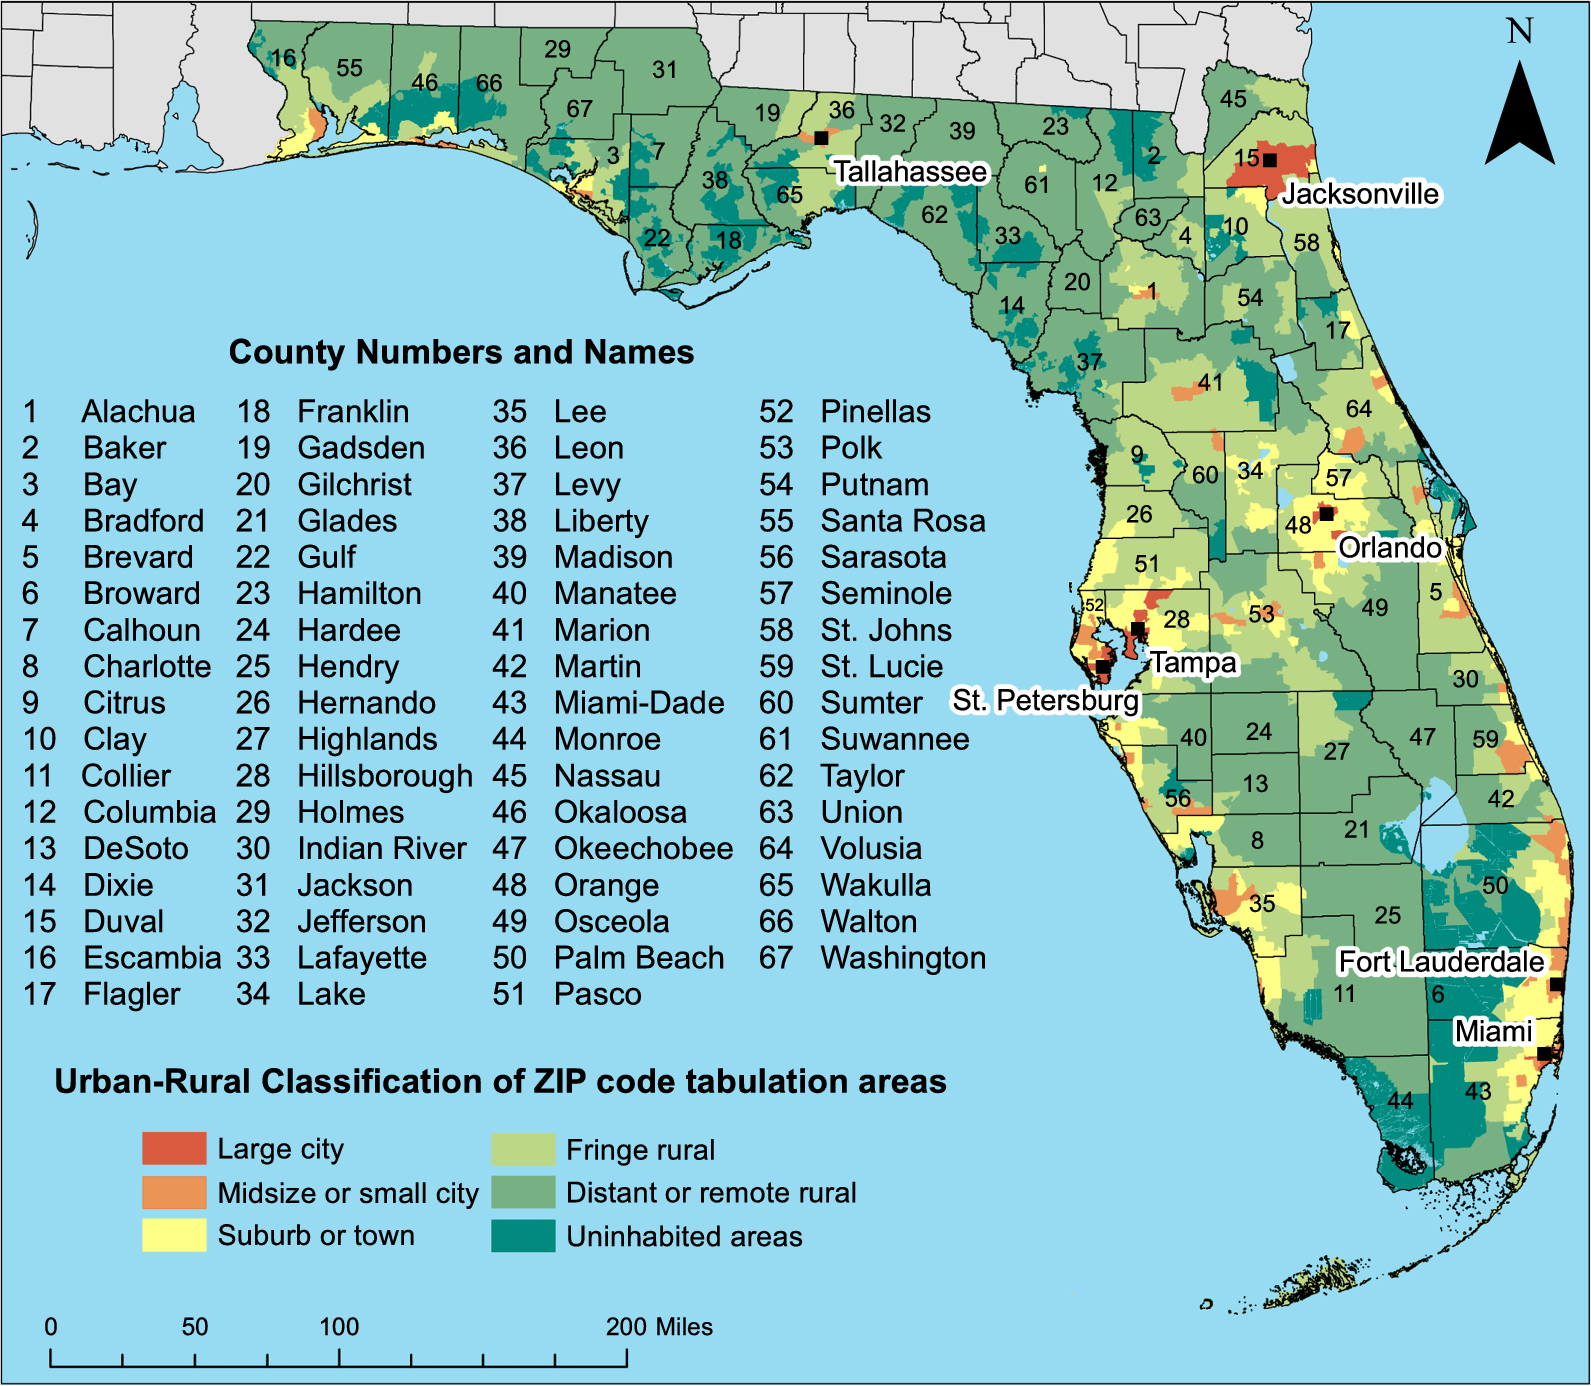 Determinants of disparities of diabetes-related hospitalization rates in Florida: a retrospective ecological study using a multiscale geographically weighted regression approach